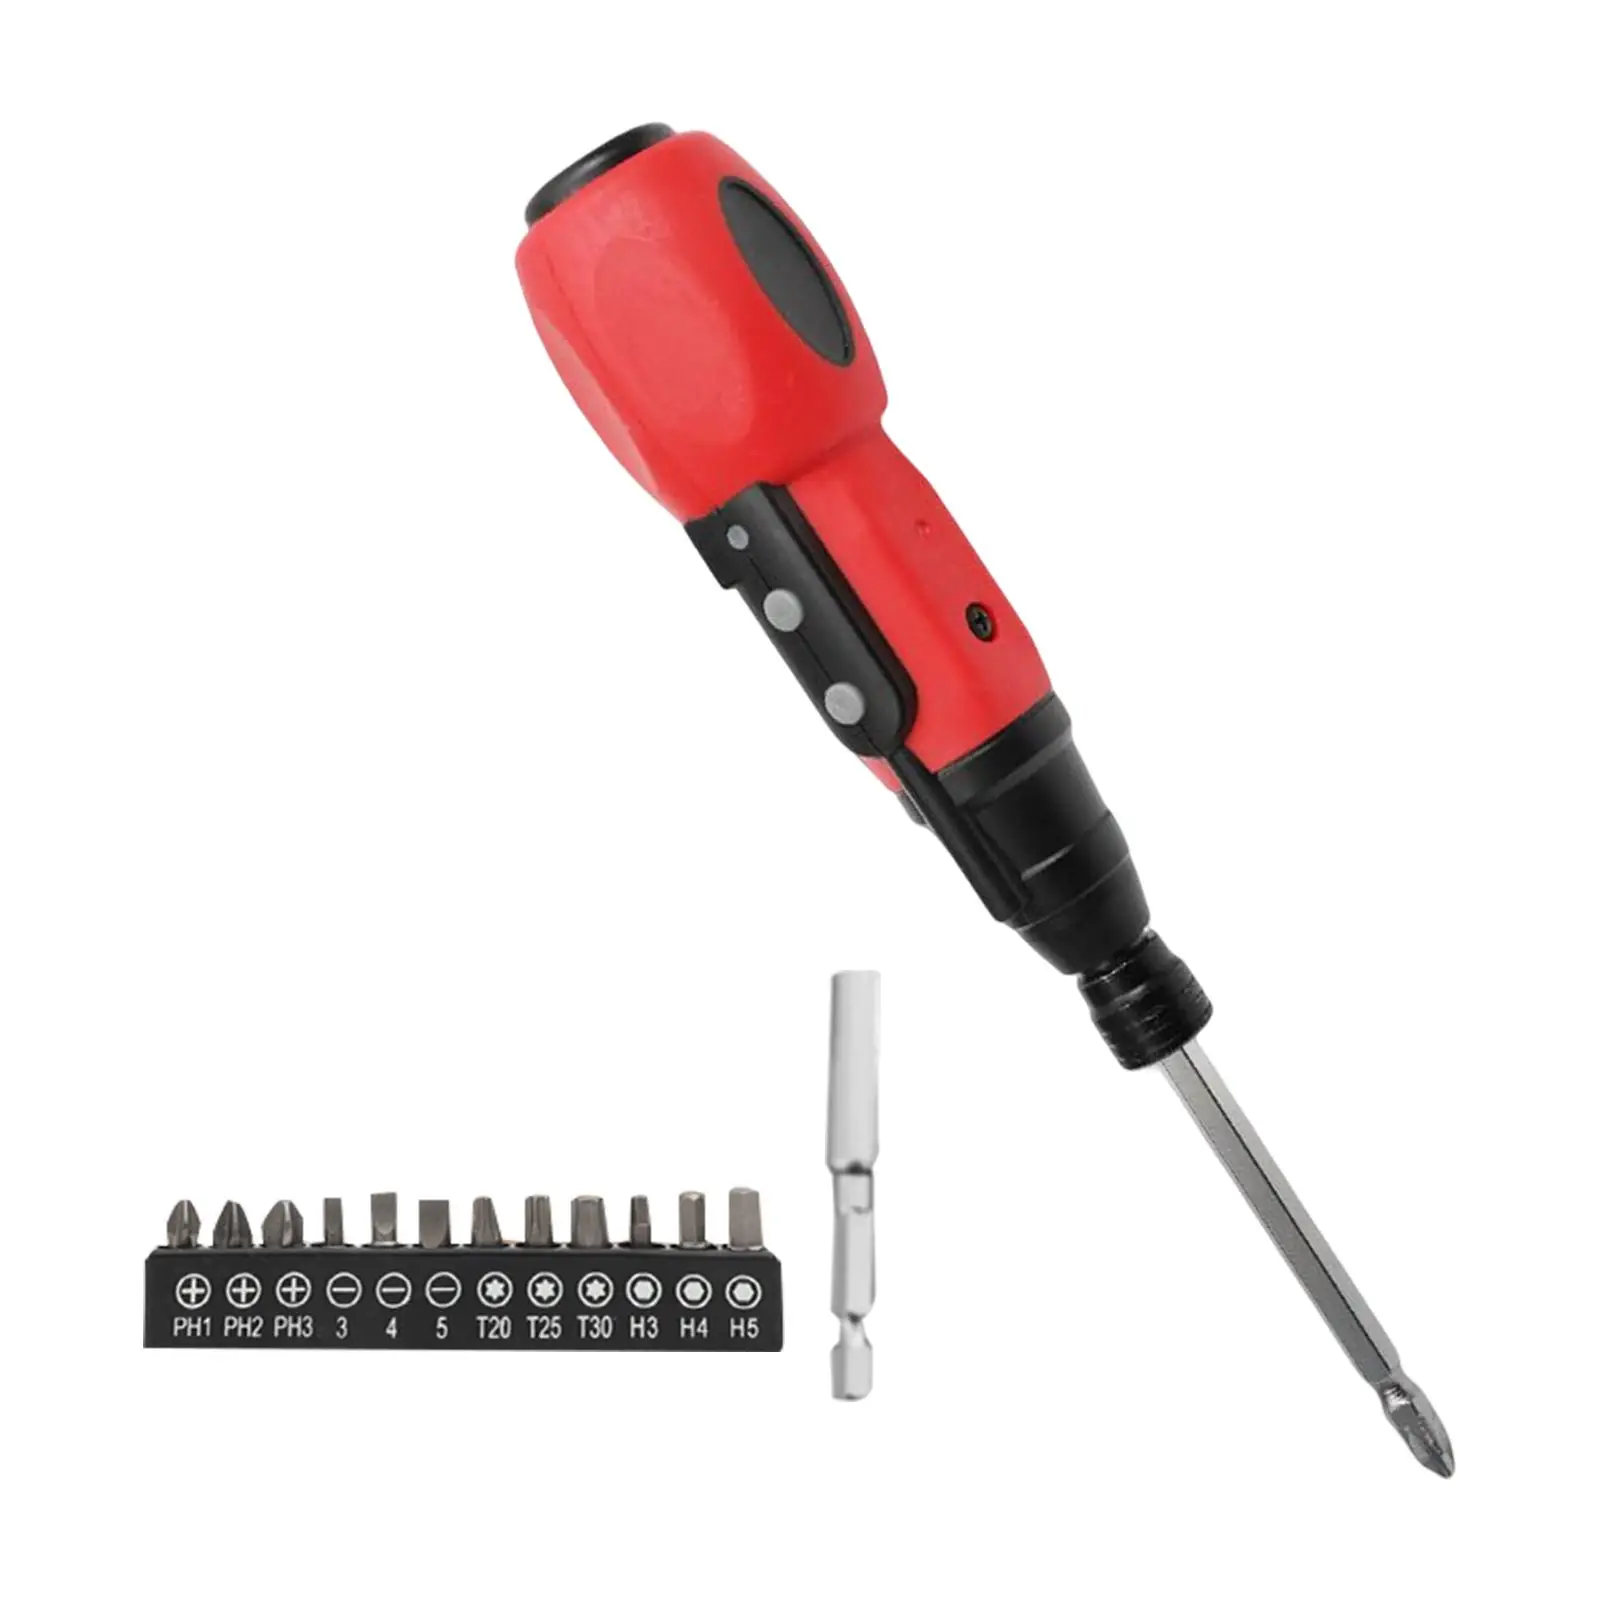 Cordless Screwdriver Set with Light Power Tools USB Rechargeable for Furniture Assembly